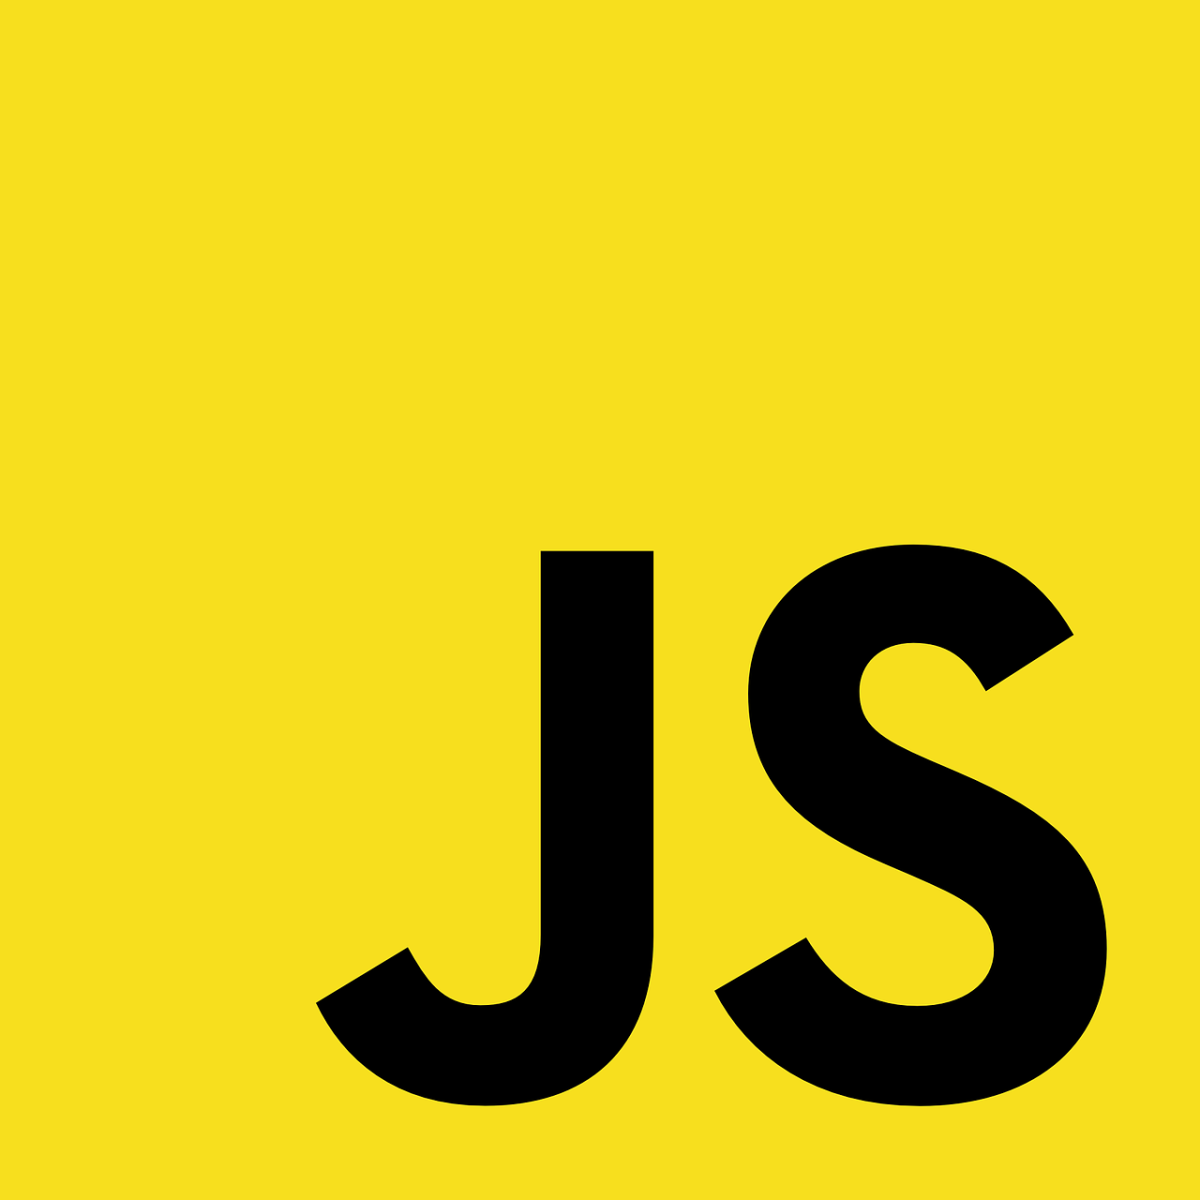 Learn JavaScript Functions For Dialog Boxes - 1